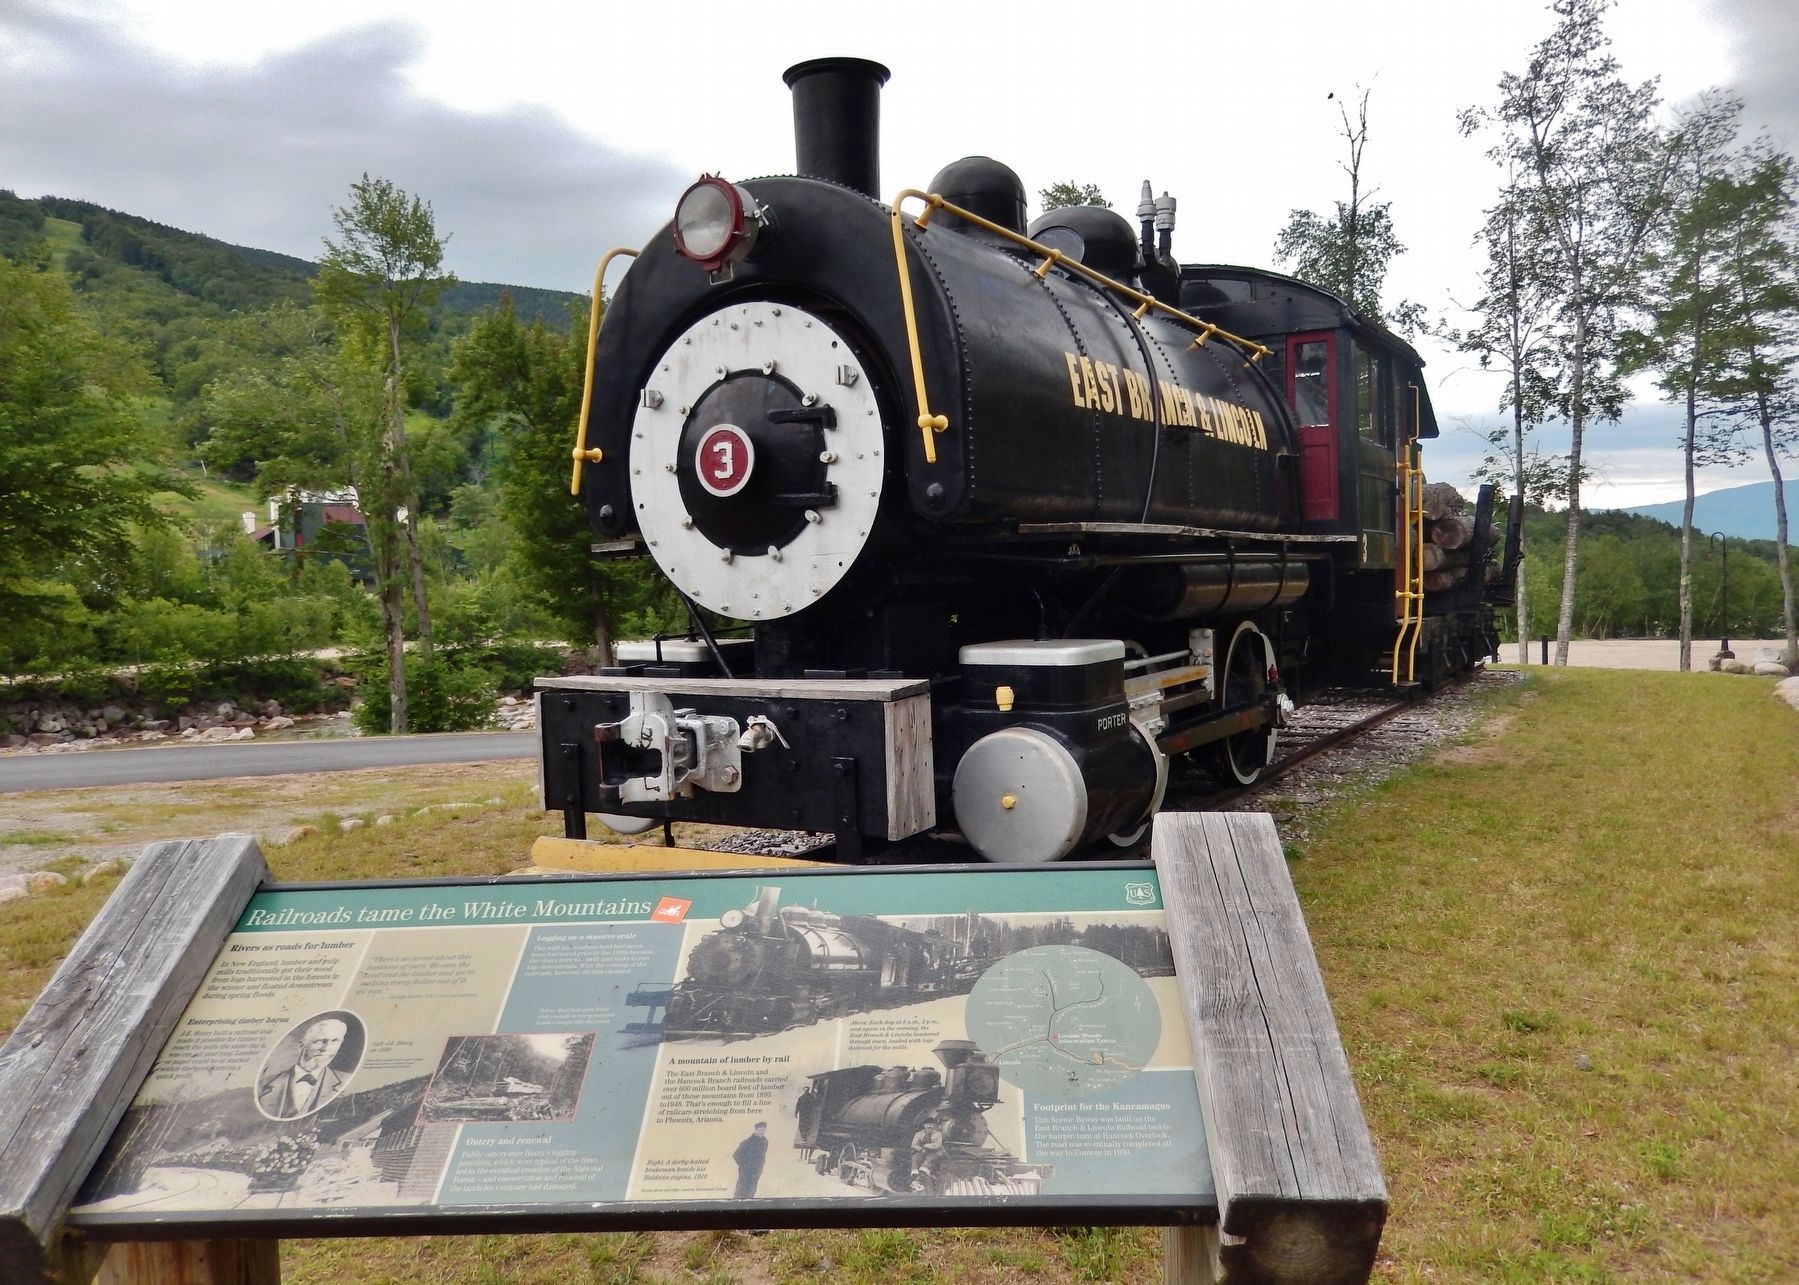 Railroads tame the White Mountains Marker (<i>wide view; engine in background</i>) image. Click for full size.